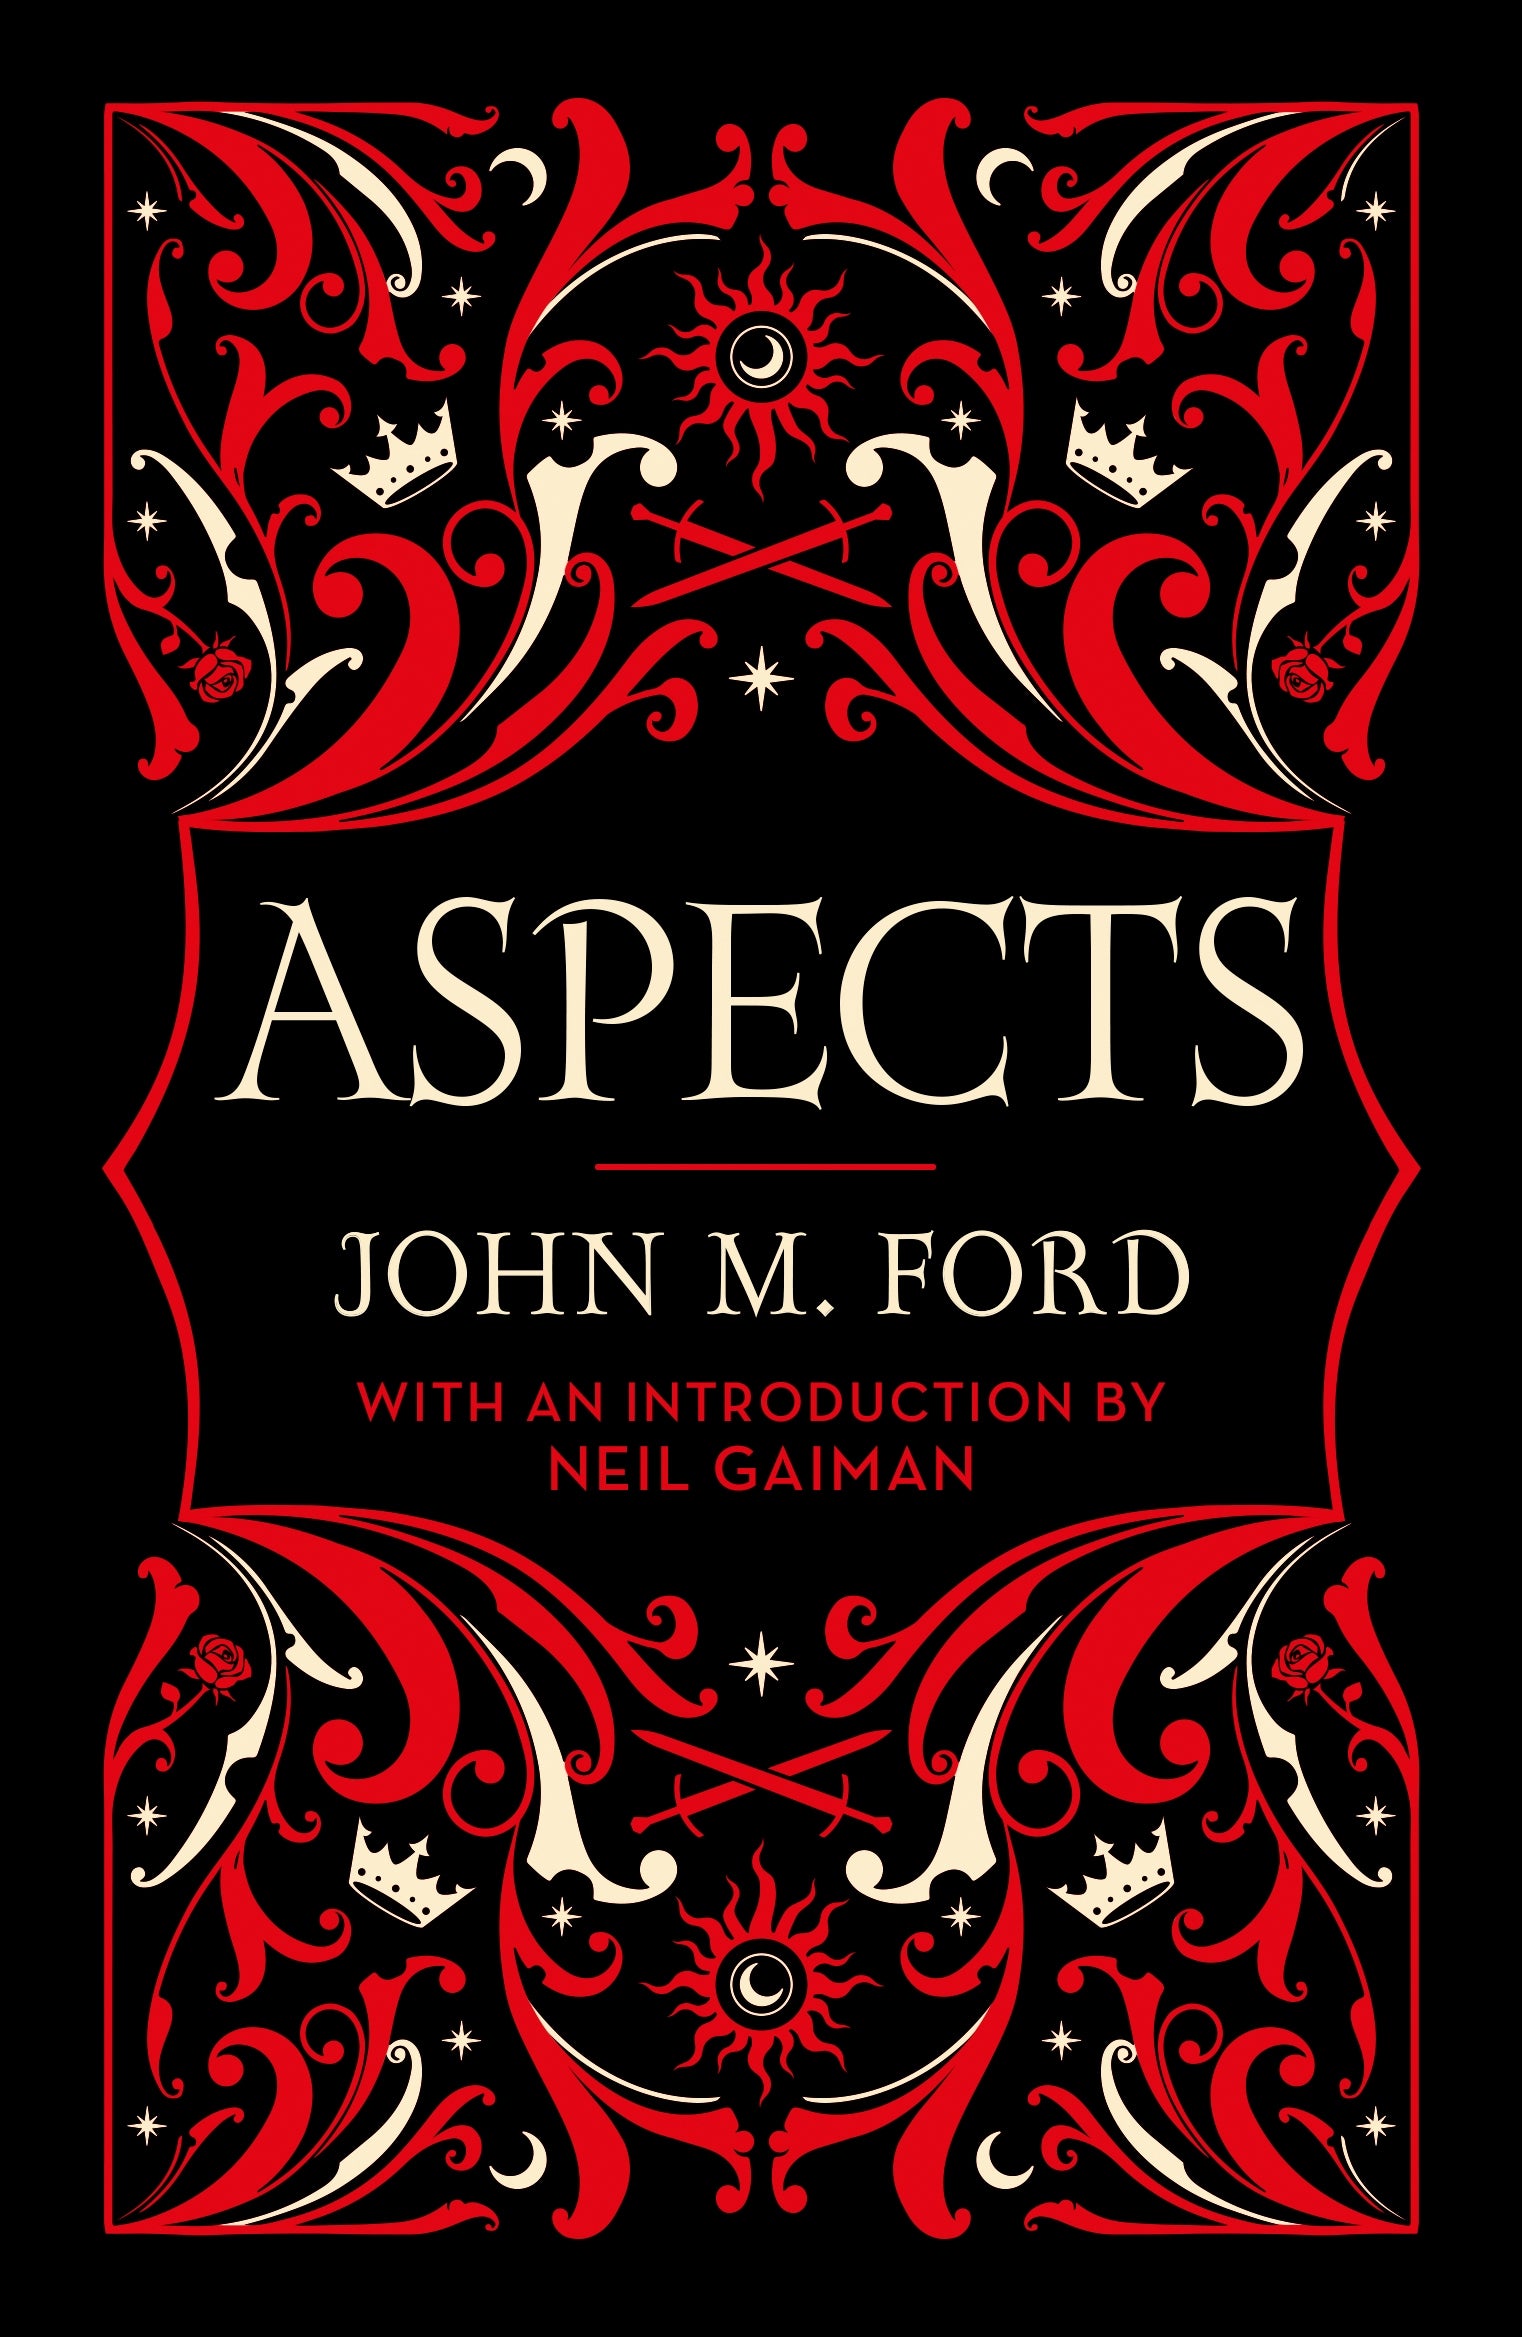 Aspects by John M. Ford